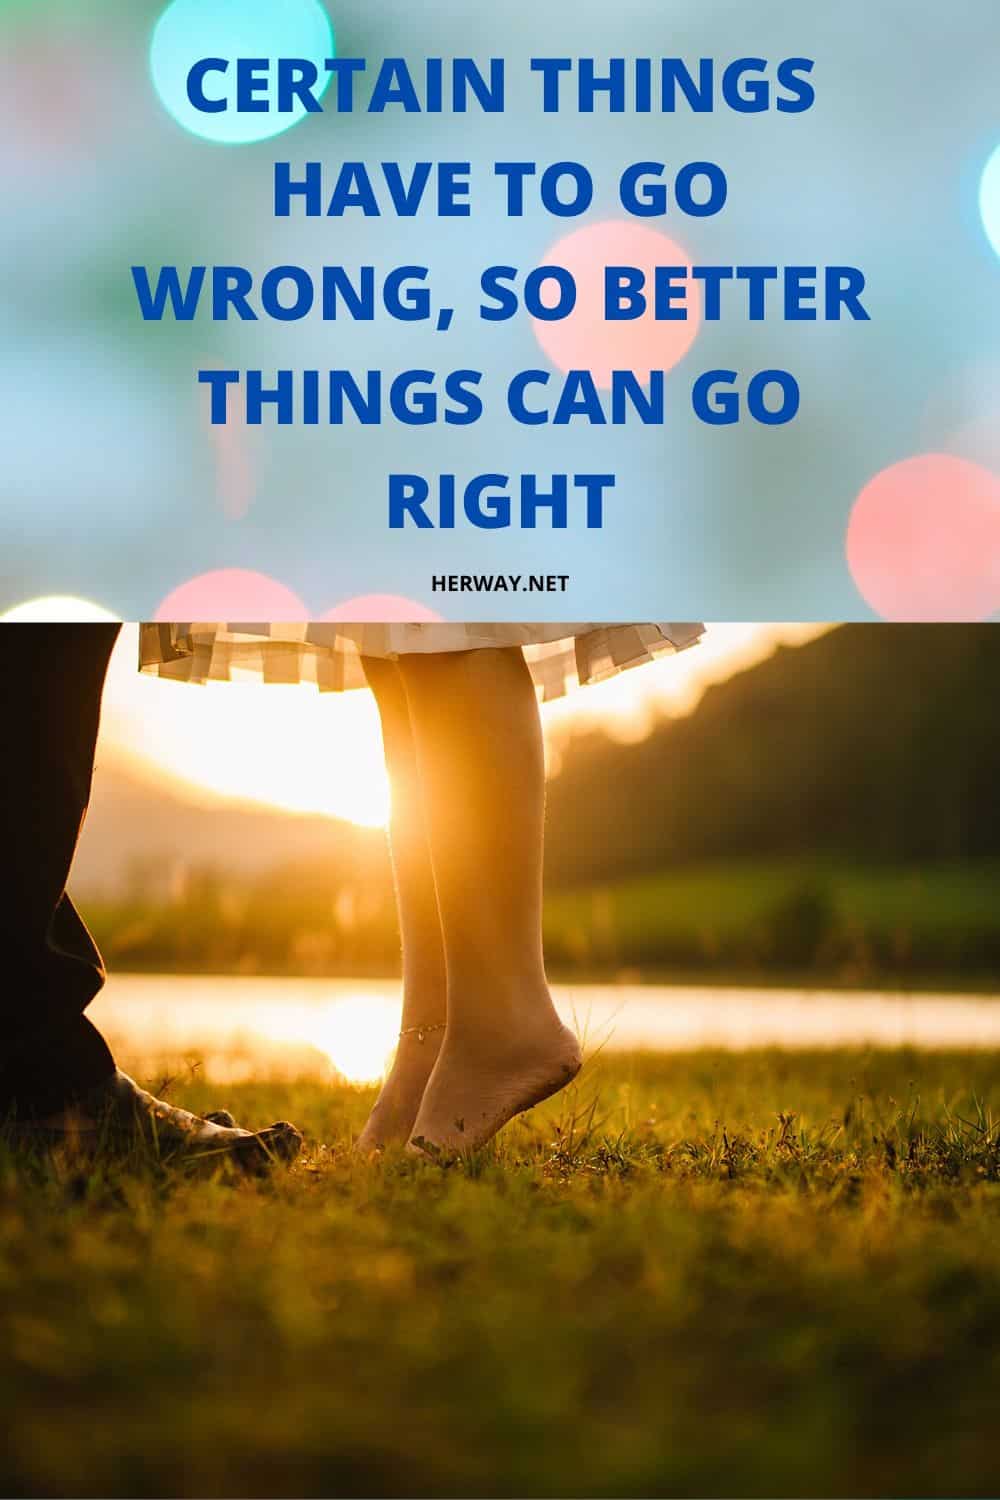 Certain Things Have To Go Wrong, So Better Things Can Go Right